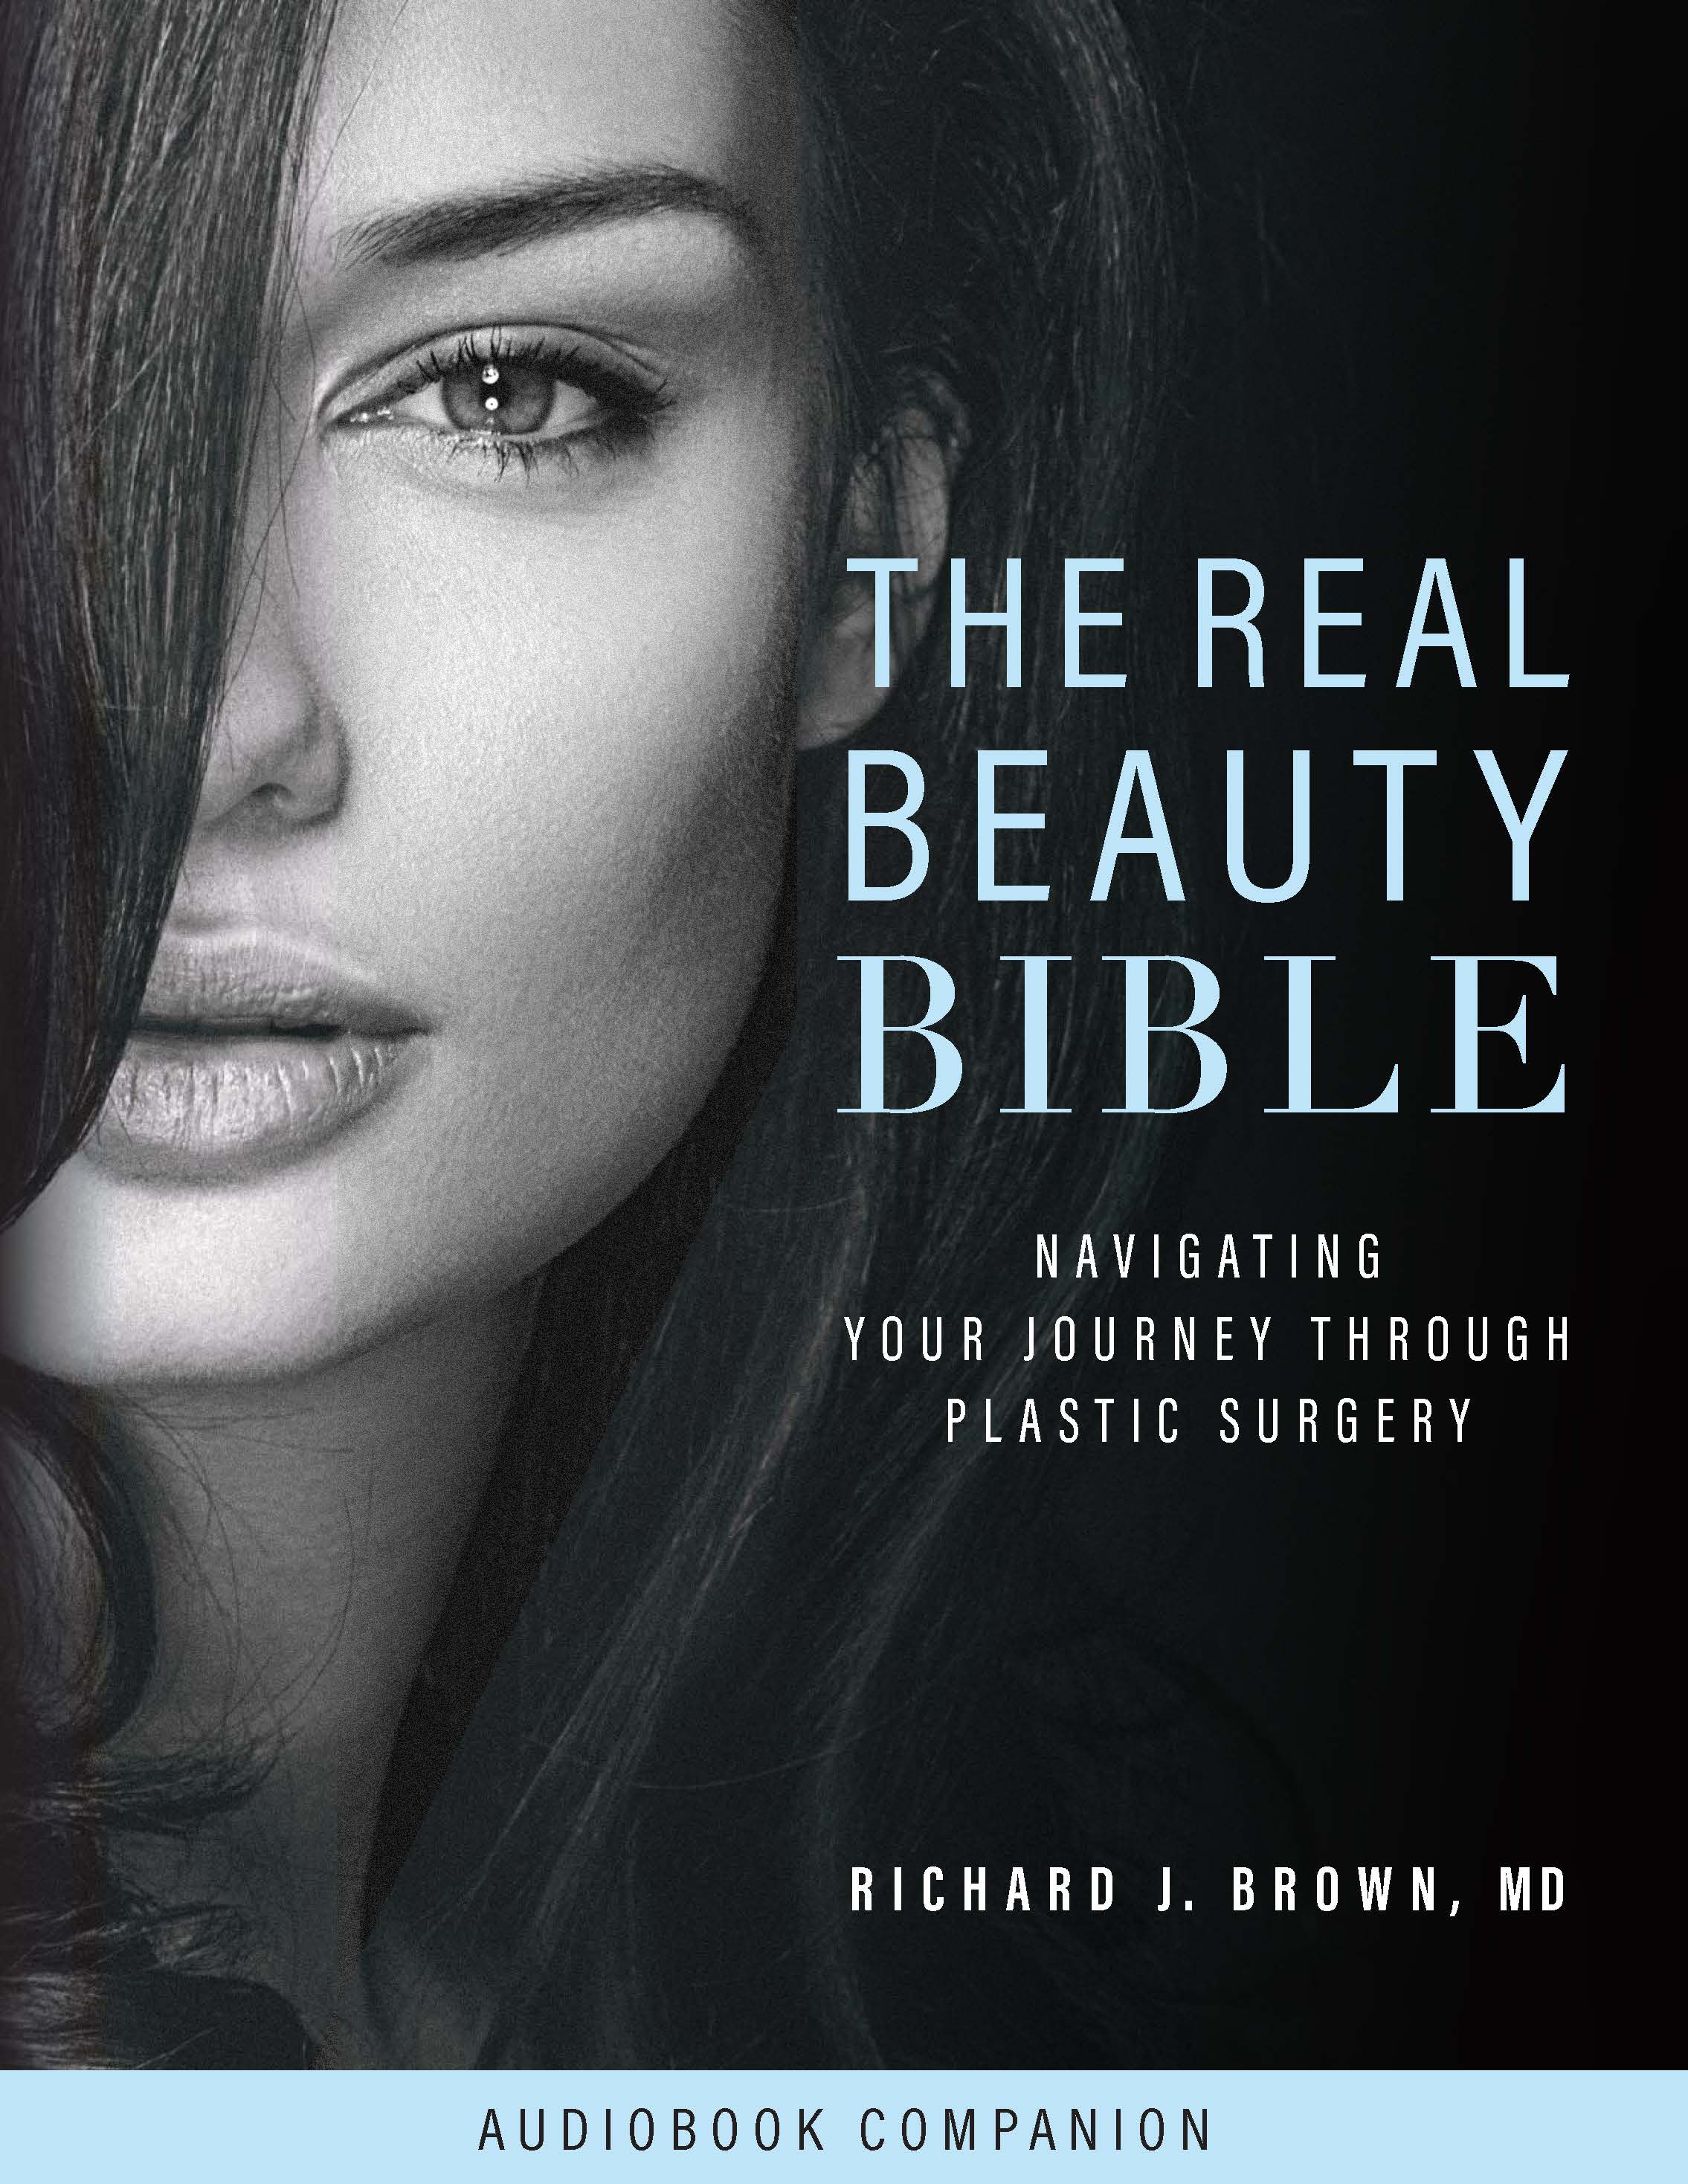 The Real Beauty Bible Resources